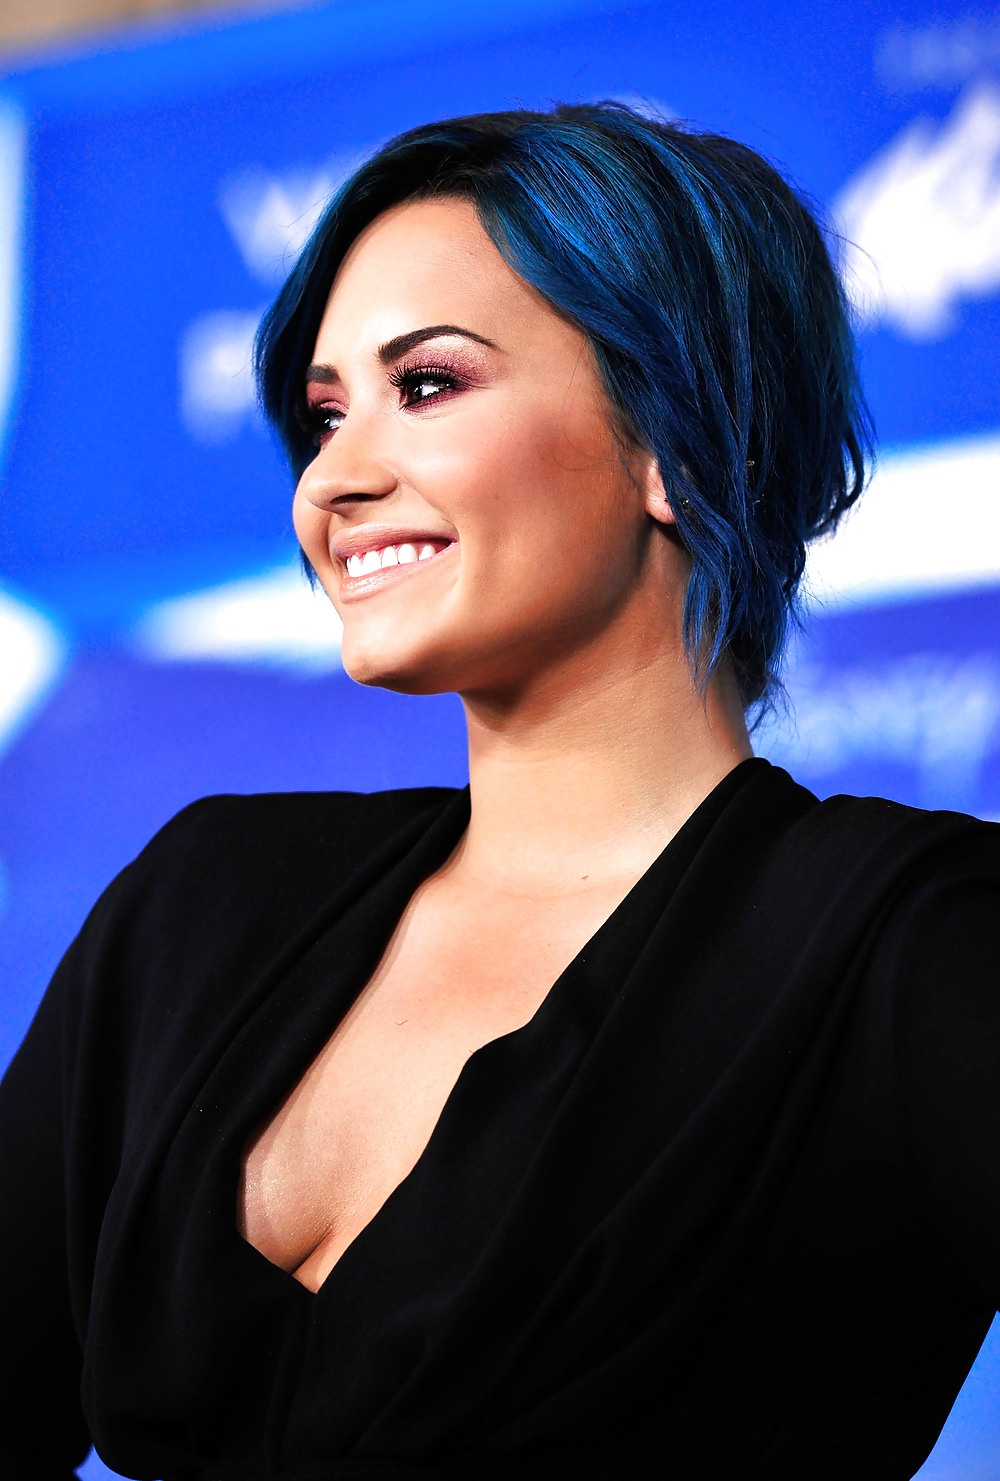 Demi Lovato with blue hair and business style #22180172